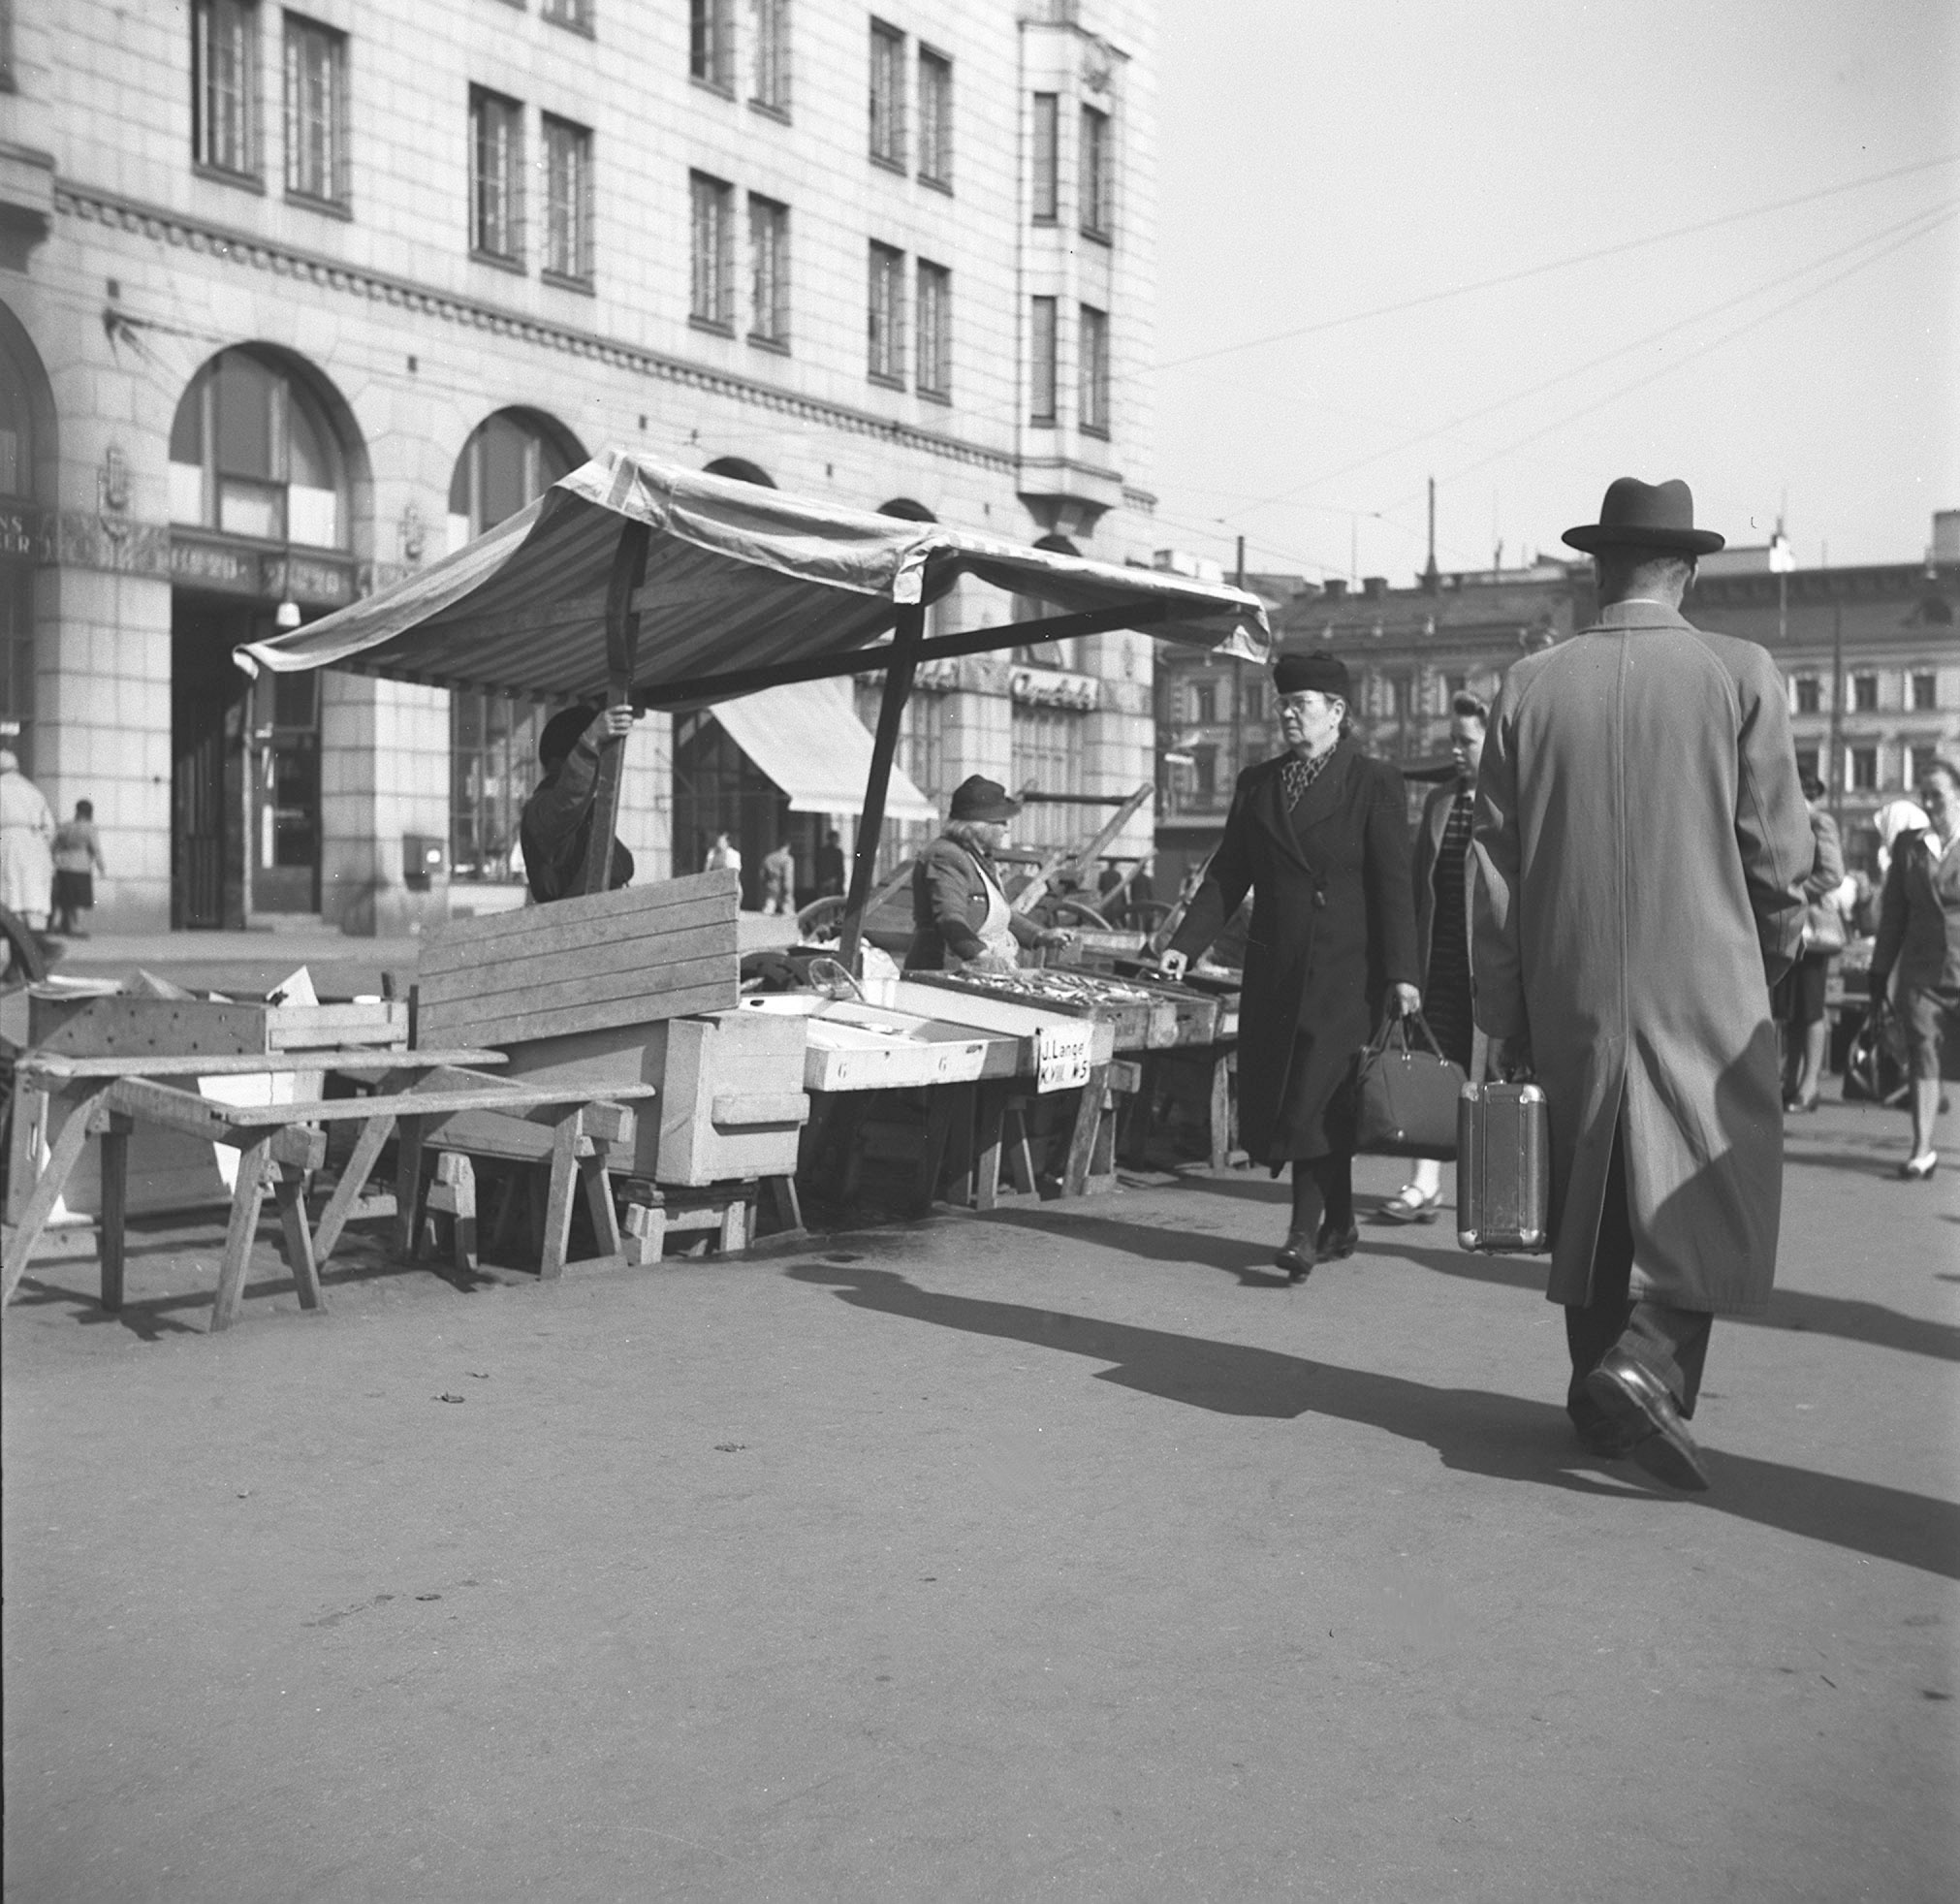 Helsinki, Marketplace 2.6.1947. (28402330983) - Helsinki, Store 2.6.1947.Photo: Ruth Träskman/Yle.
Do you know something about this picture? Please leave a comment or contact us by e-mail: flickr@yle.fi Read more about Yle, the Finnish Broadcasting Company: http://yle.fi/life park Fler skatter från Yles archive: http://svenska.yle.fi/arkivet More about Yle, the Finnish Broadcasting Company: http://yle.fi/yleisradio/ About-yle/this-is-yle